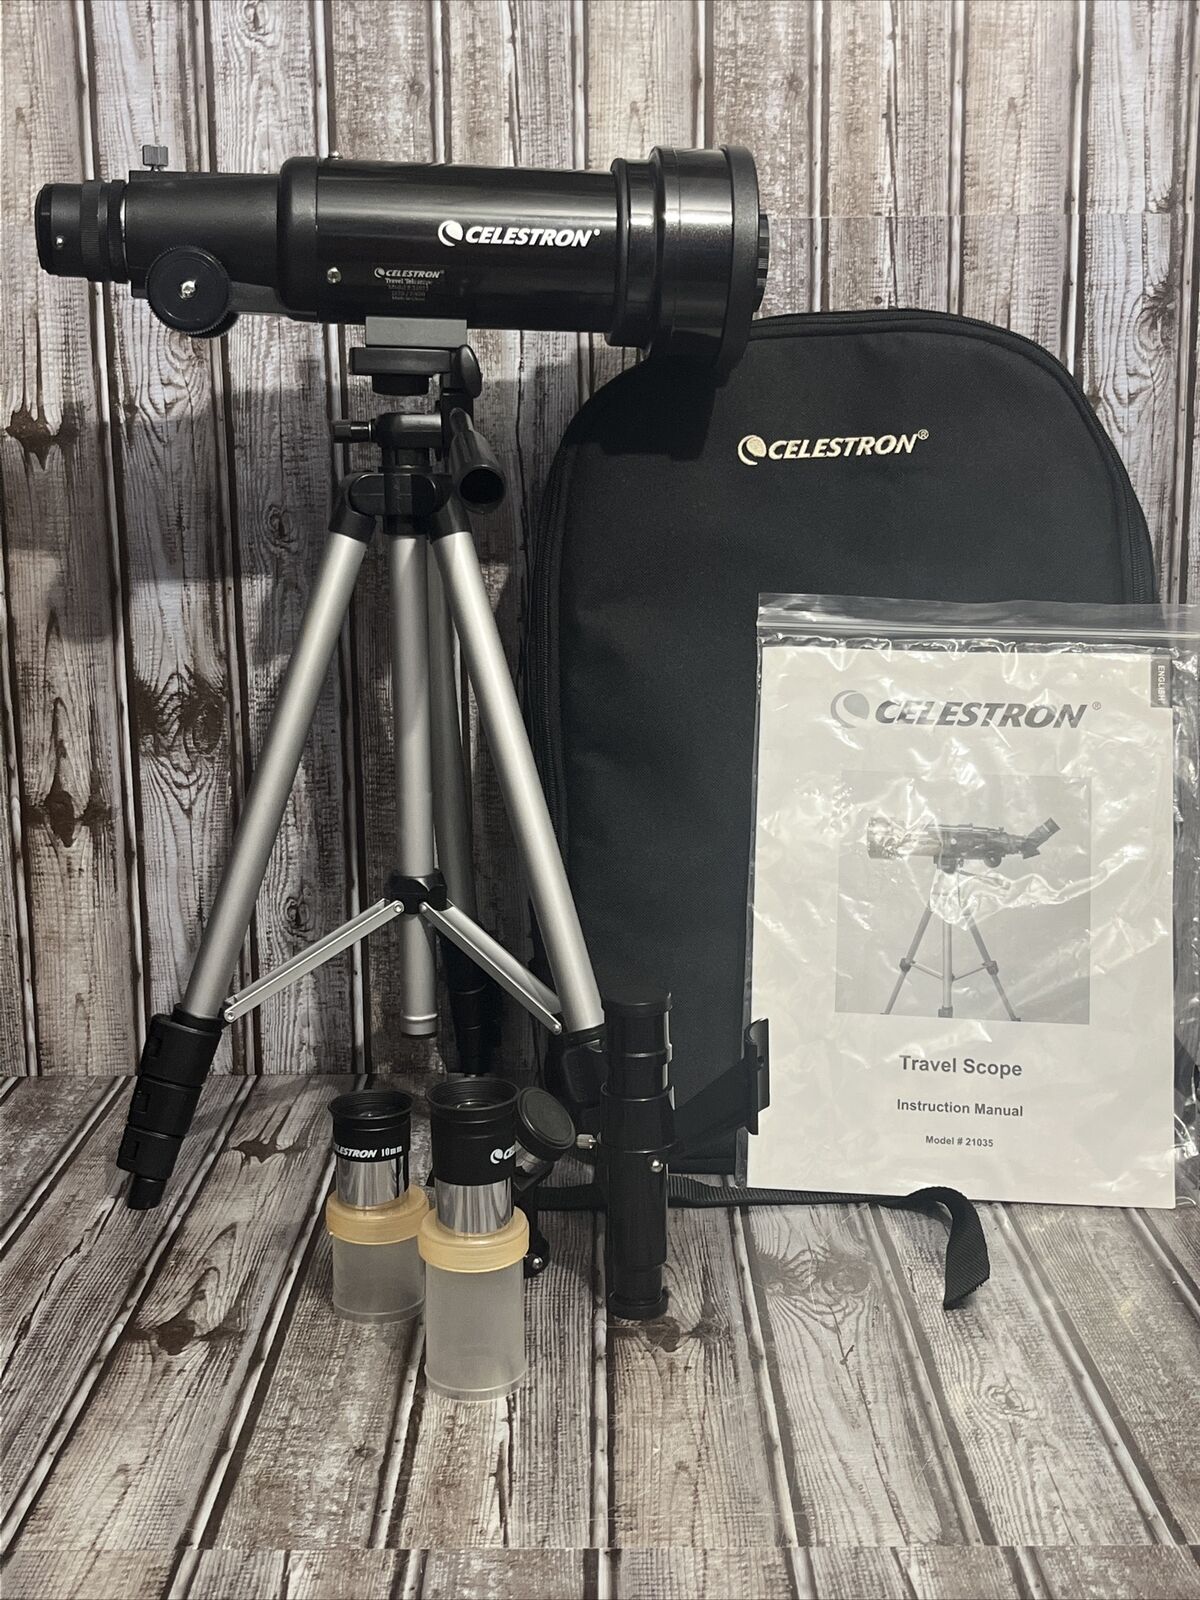 Celestron 21035 D70/F400 Travel Scope with Backpack and Accessories Excellent